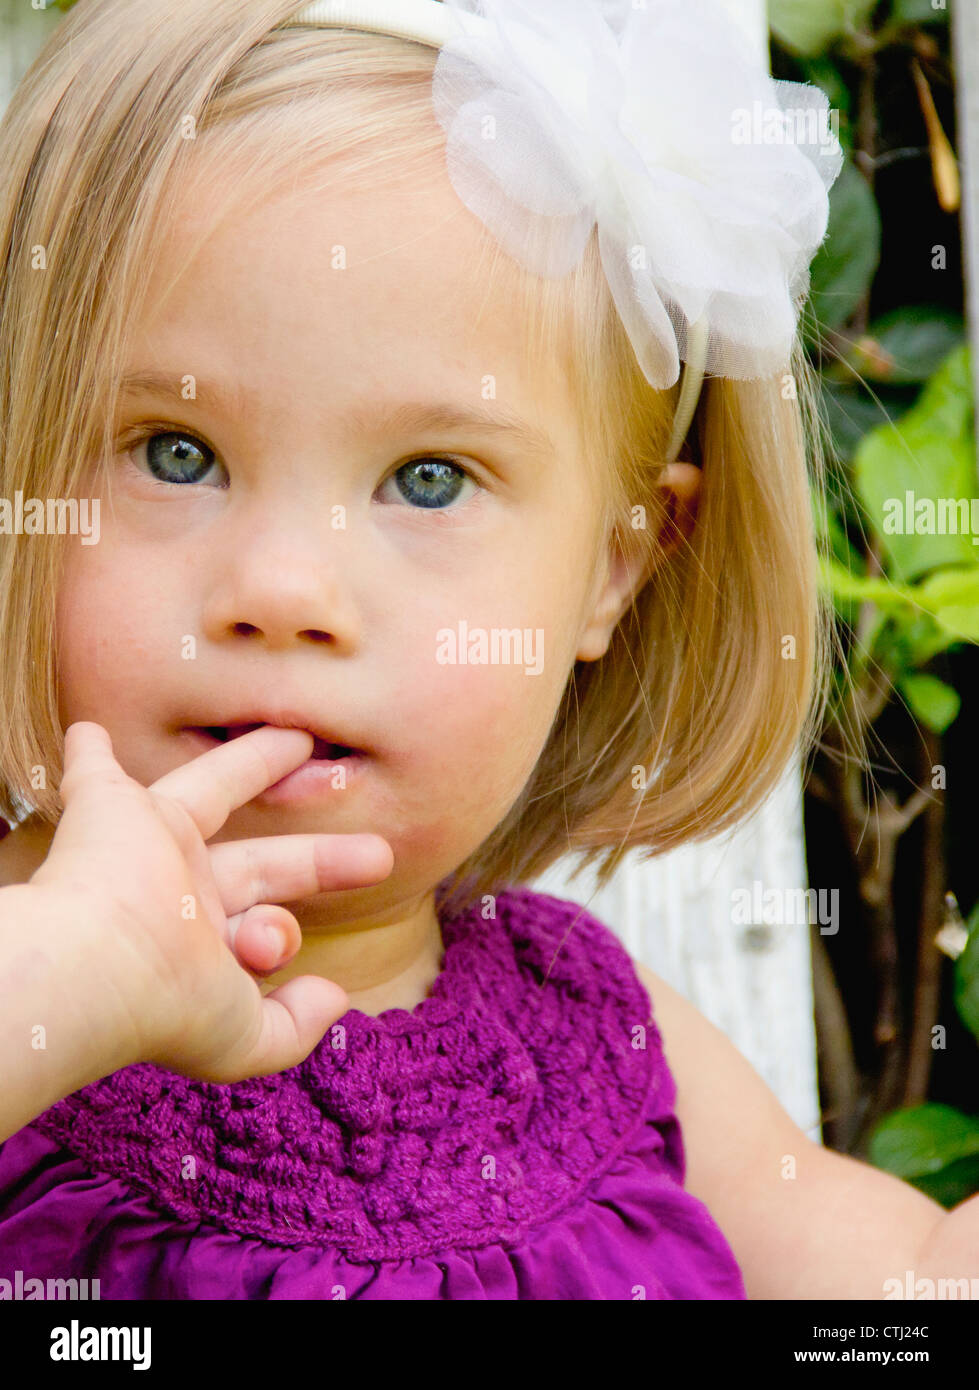 Portrait Of A Young Girl With Down Syndrome With Her Finger In Her Mouth; Three Hills, Alberta, Canada Stock Photo